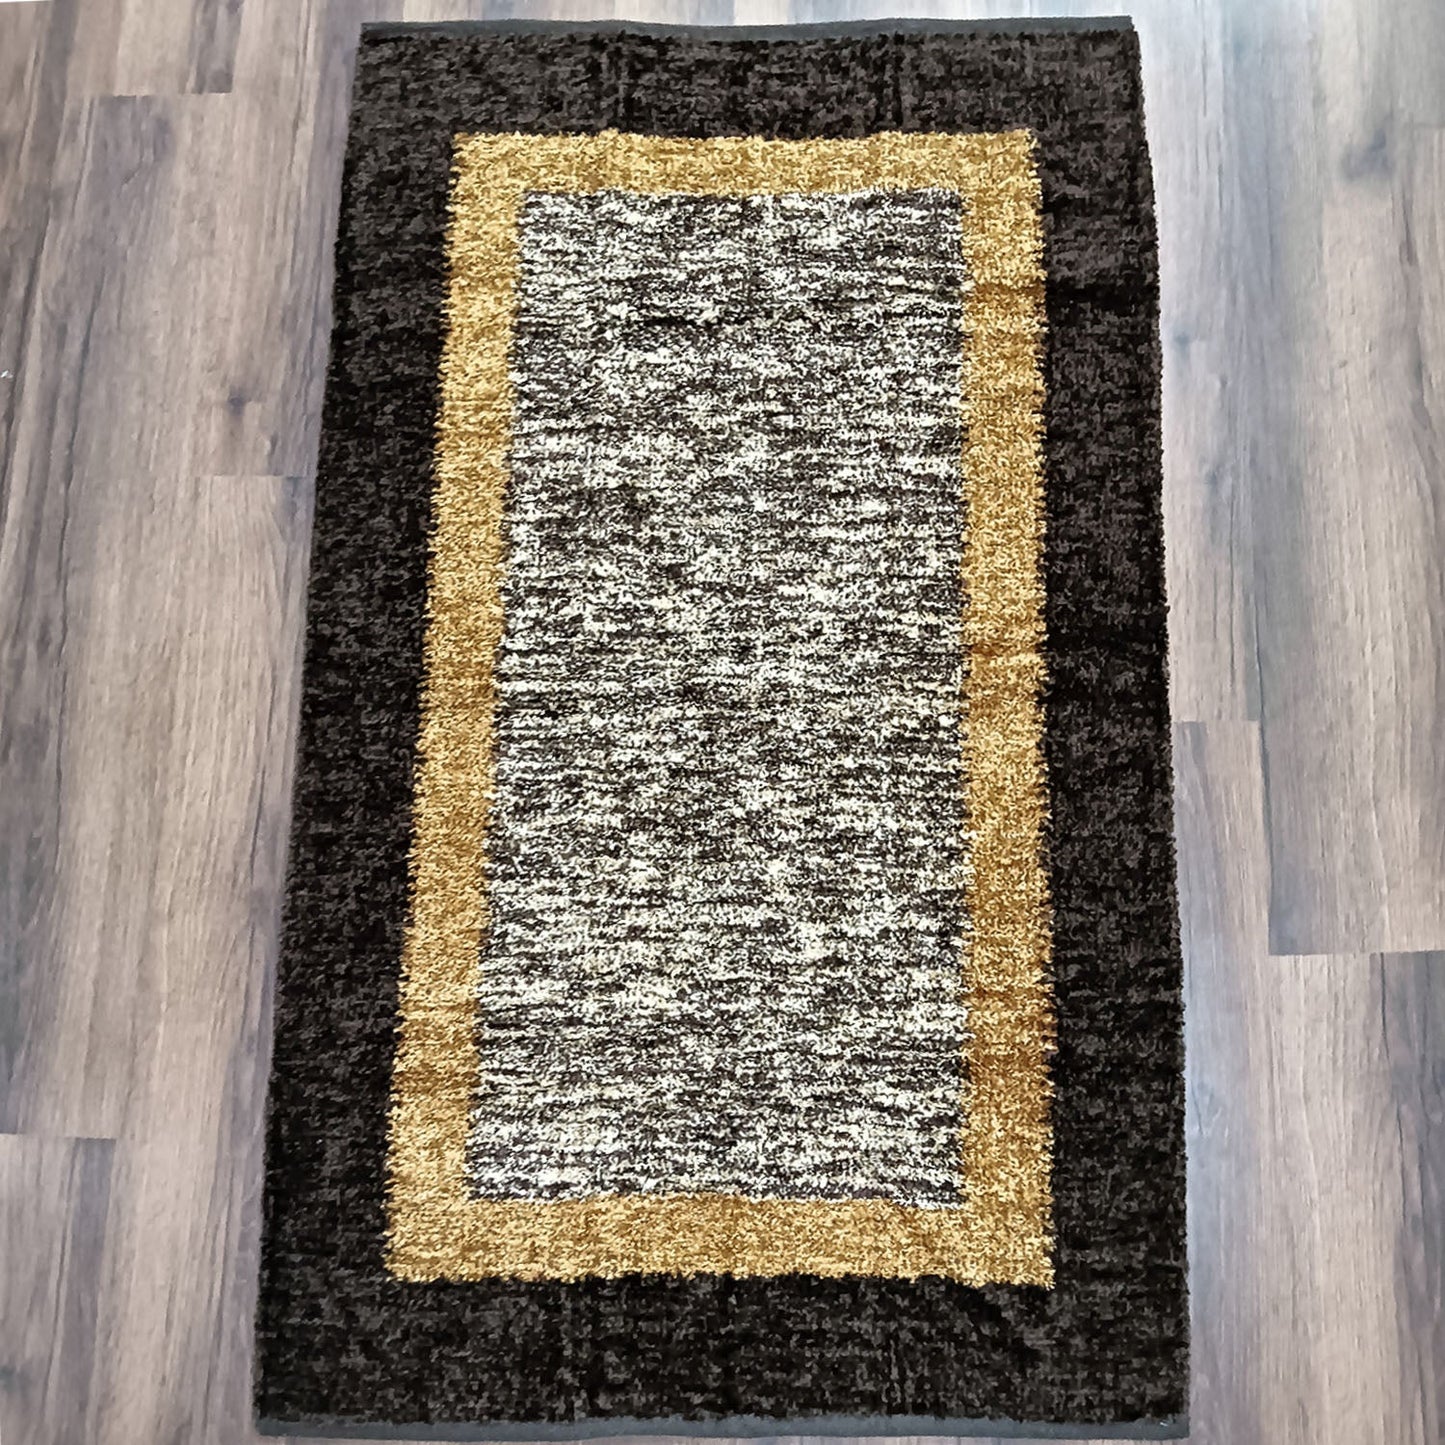 Avioni Handloom Cut Shuttle Rugs | Master Artisans Work | Feather like Luxurious Silk Soft Touch | Home Washable | Coffee, Gold Beige and White | Reversible - 3 feet x 5 feet (~90 cm x 150 cm)